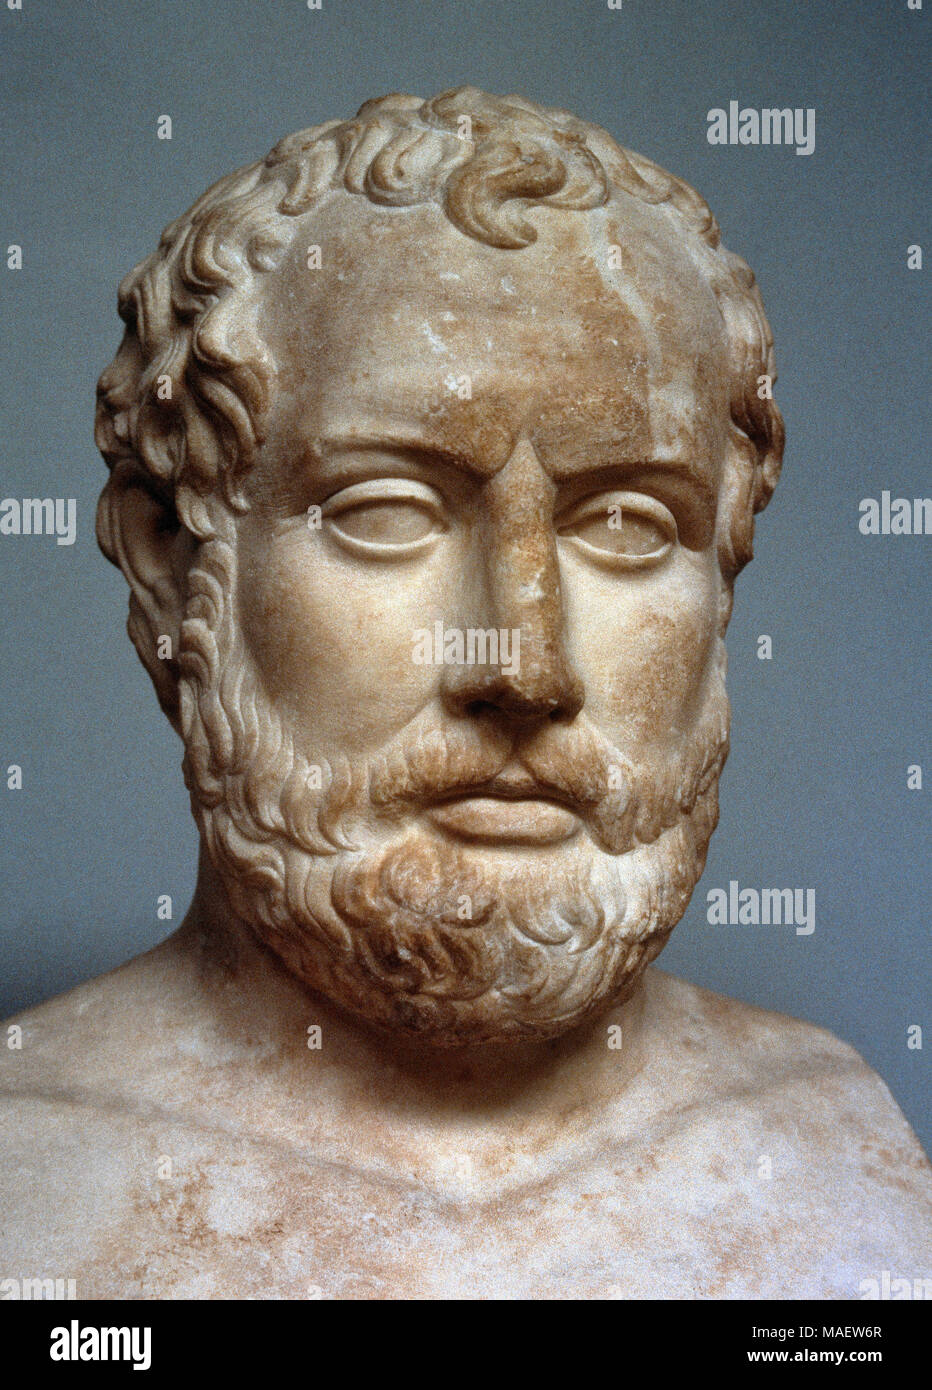 Aeschines (389-314 BC). Greek statesman and one of the ten Attics orators. Bust. Roman copy of a Greek sculpture found in Bitolia. British Museum, London, England. Stock Photo